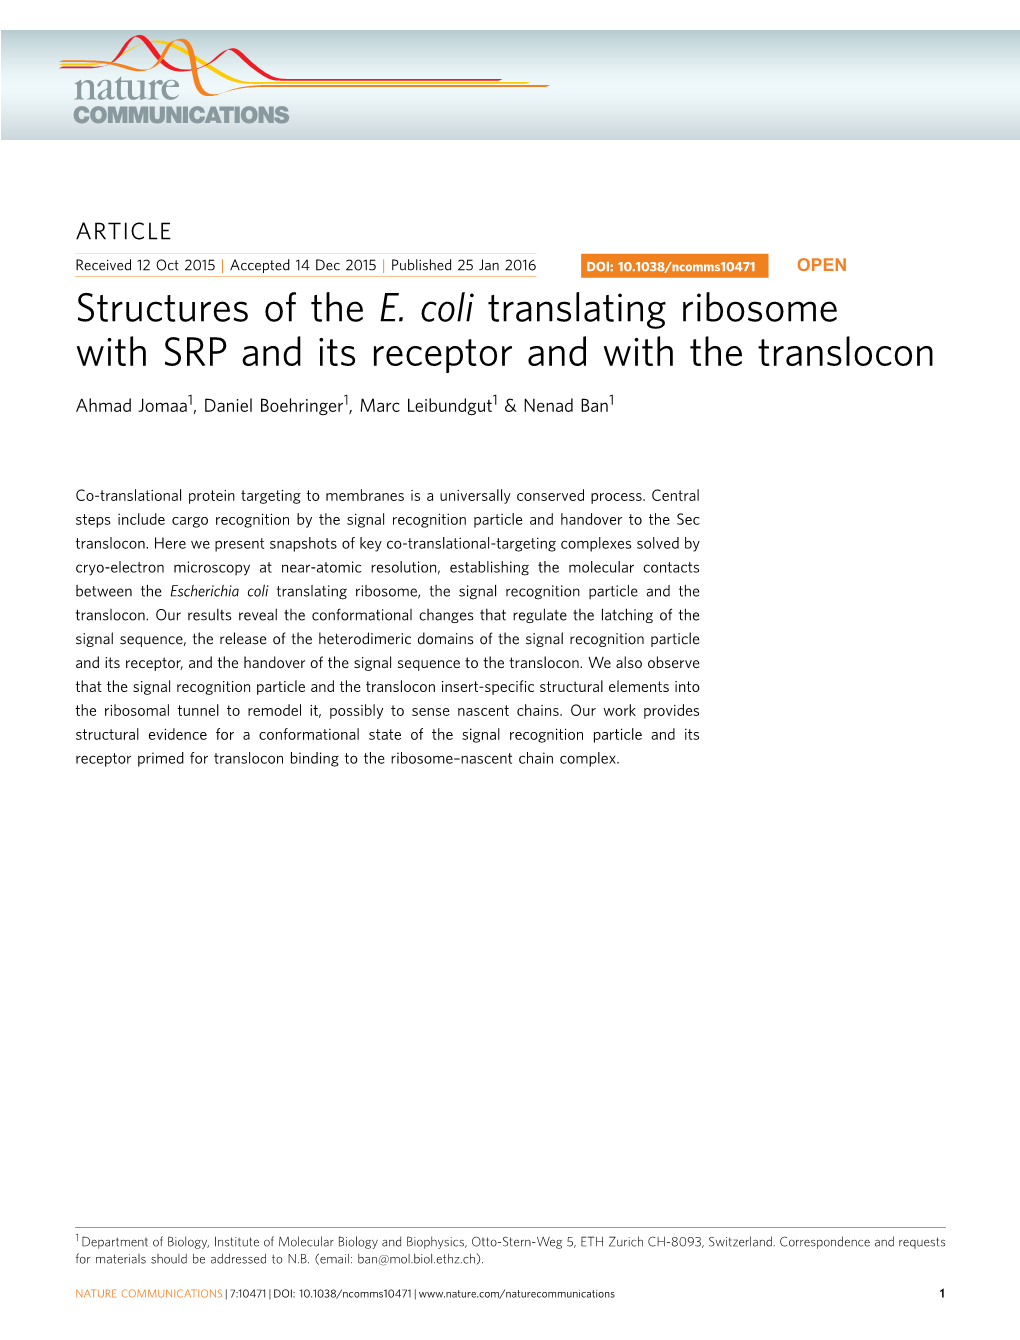 Structures of the E. Coli Translating Ribosome with SRP and Its Receptor and with the Translocon